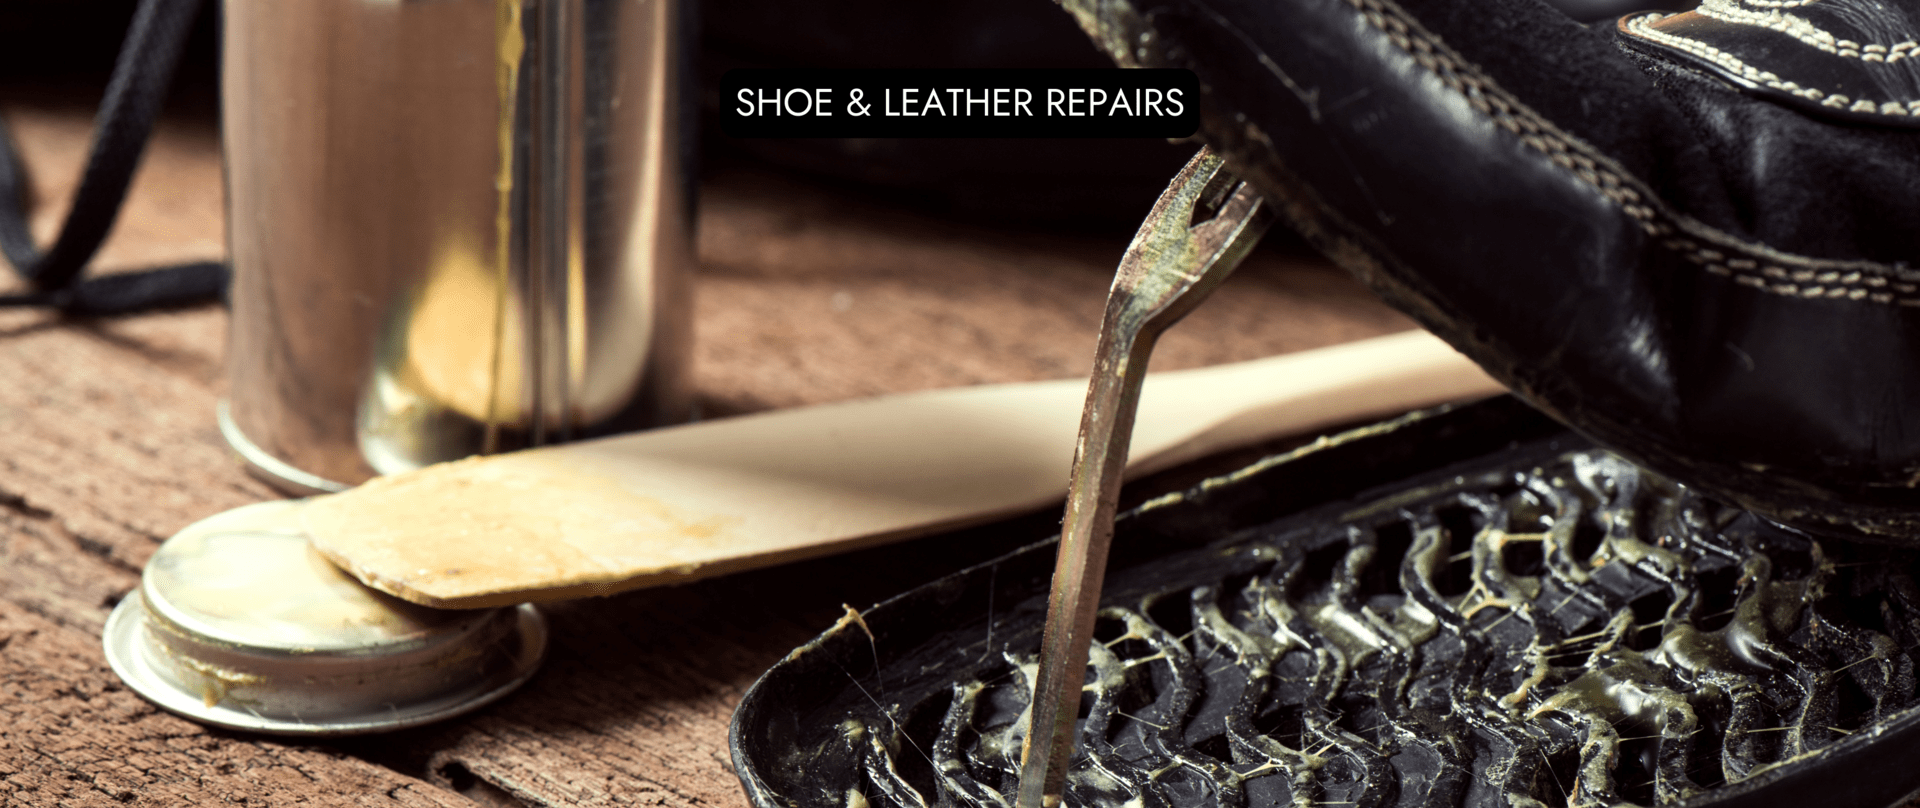 Shoe & leather repairs